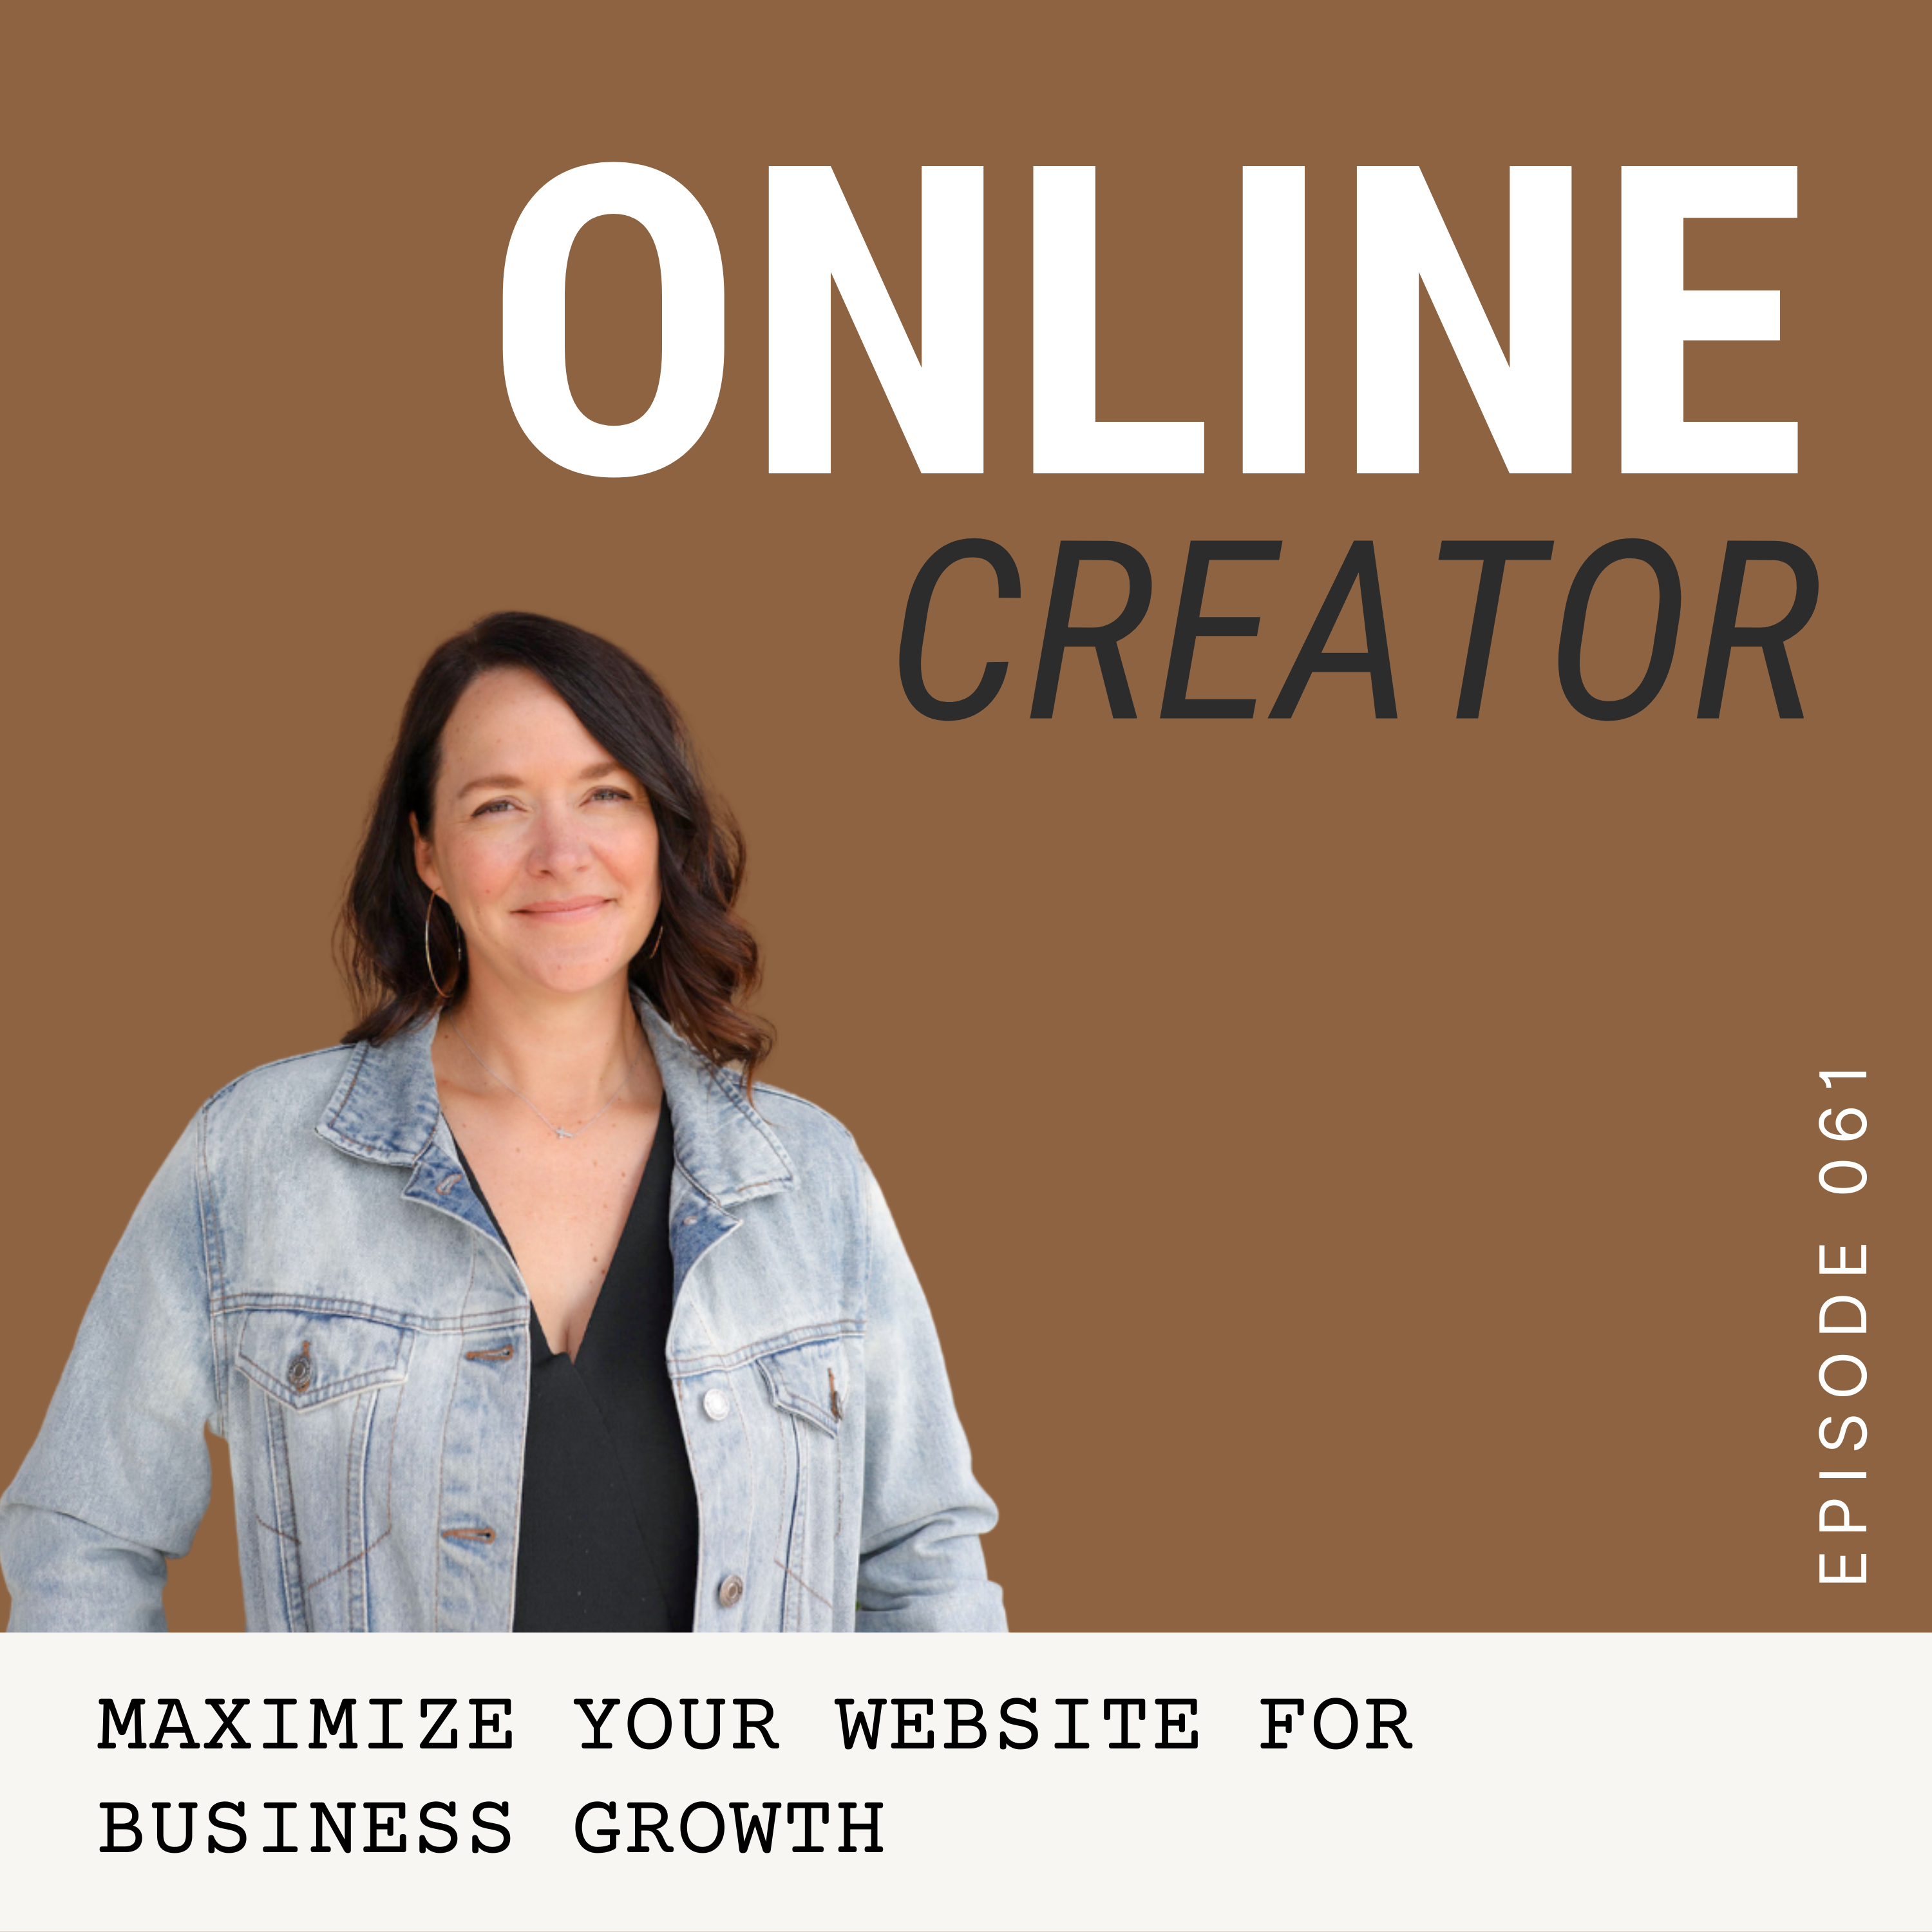 Ep 061: Maximize your Website for Business Growth, of the Online Creator Podcast with host Kim Tradewell